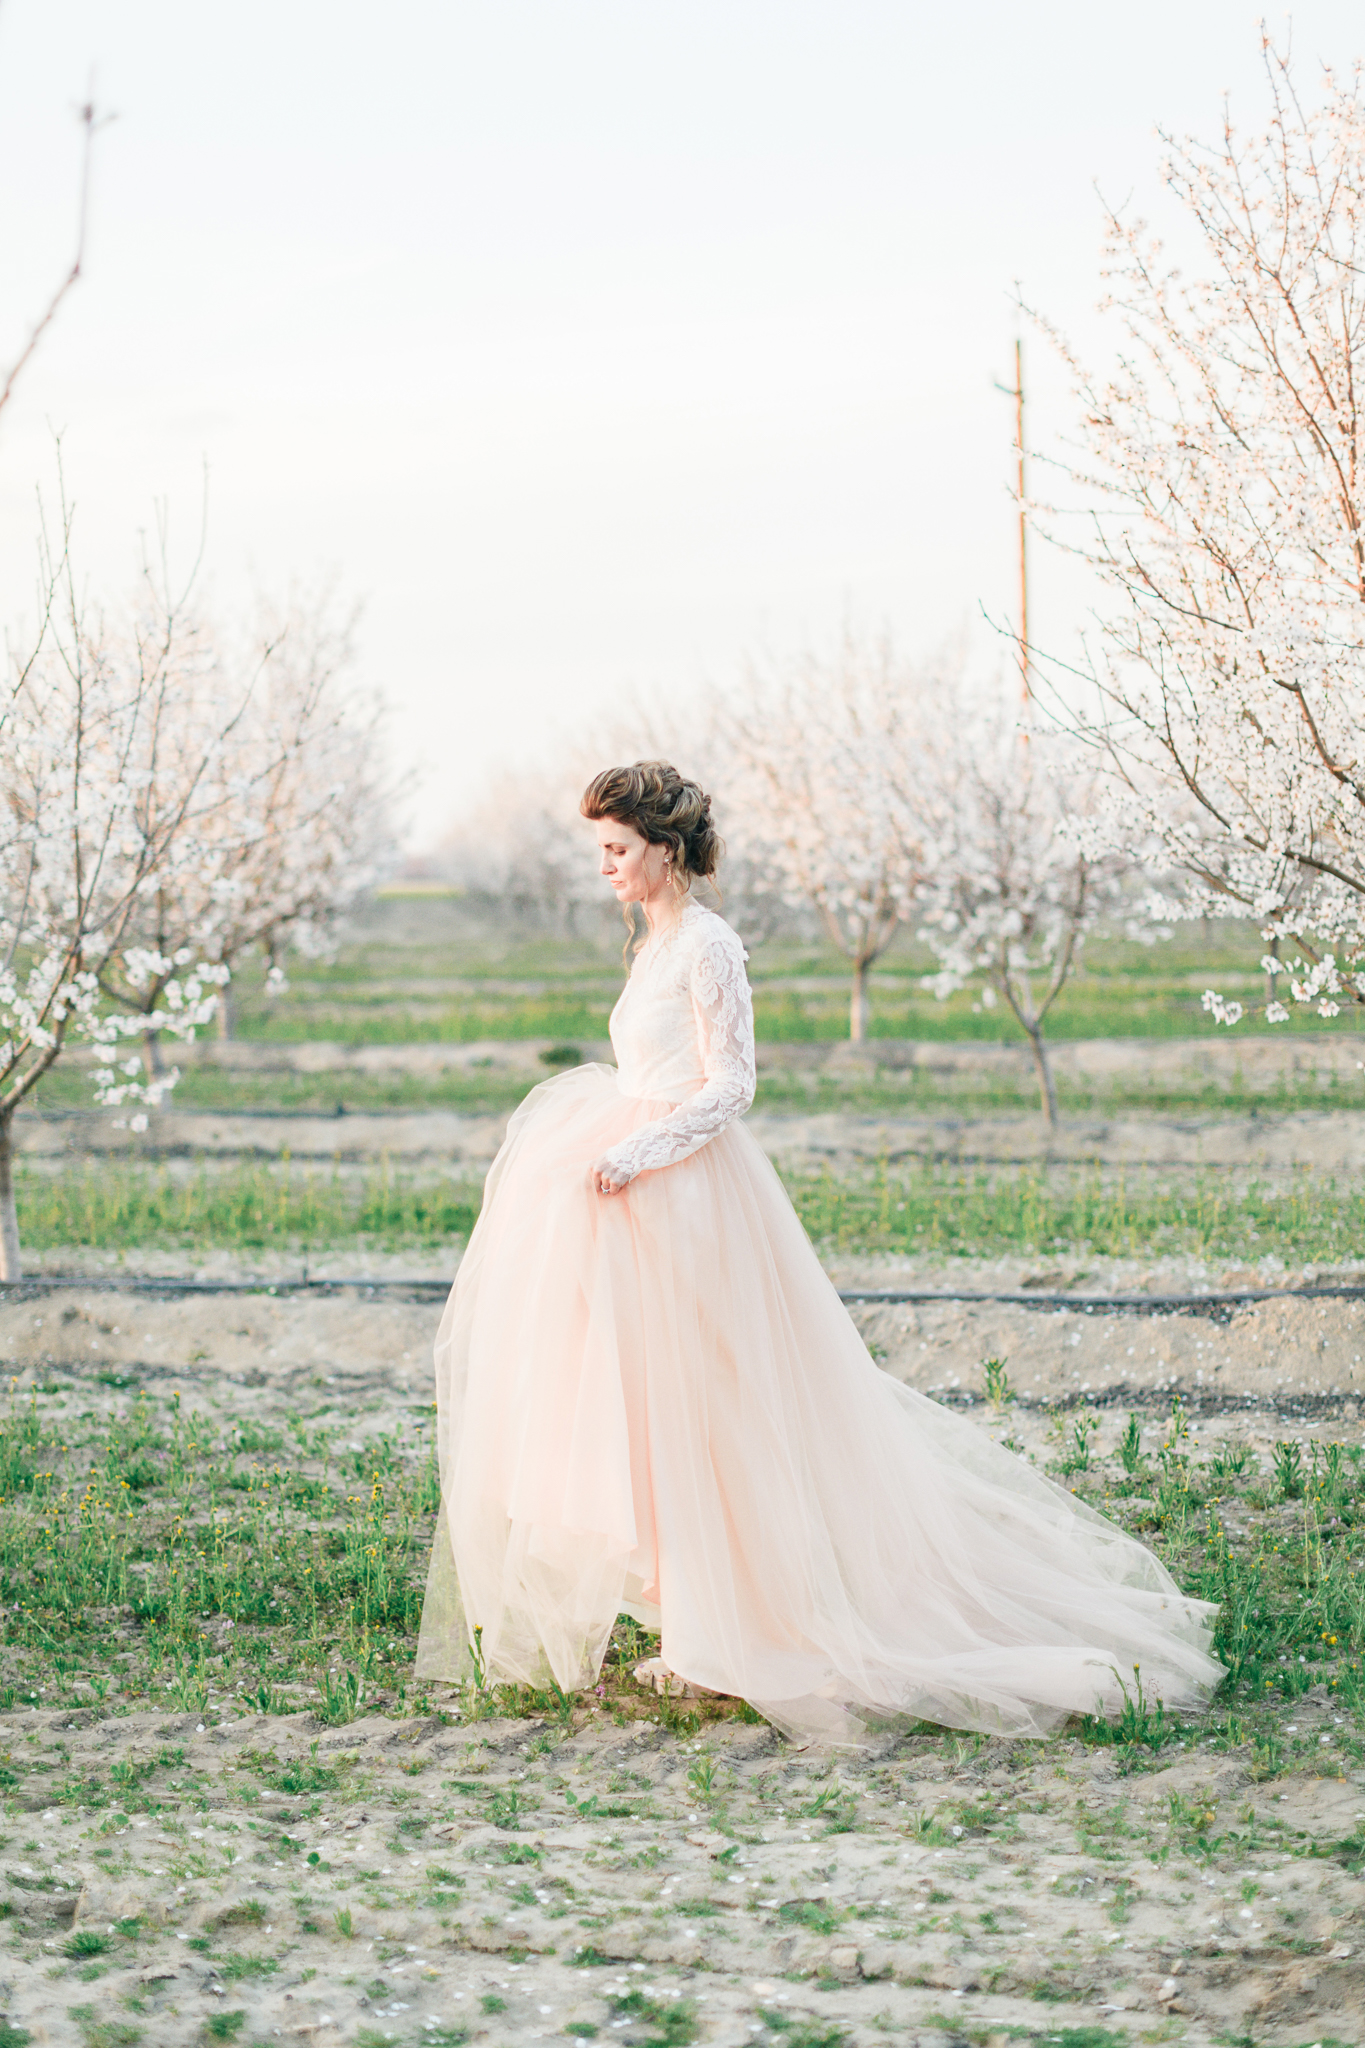 Almond Orchard Inspiration - Central California - Katie McGihon Photography